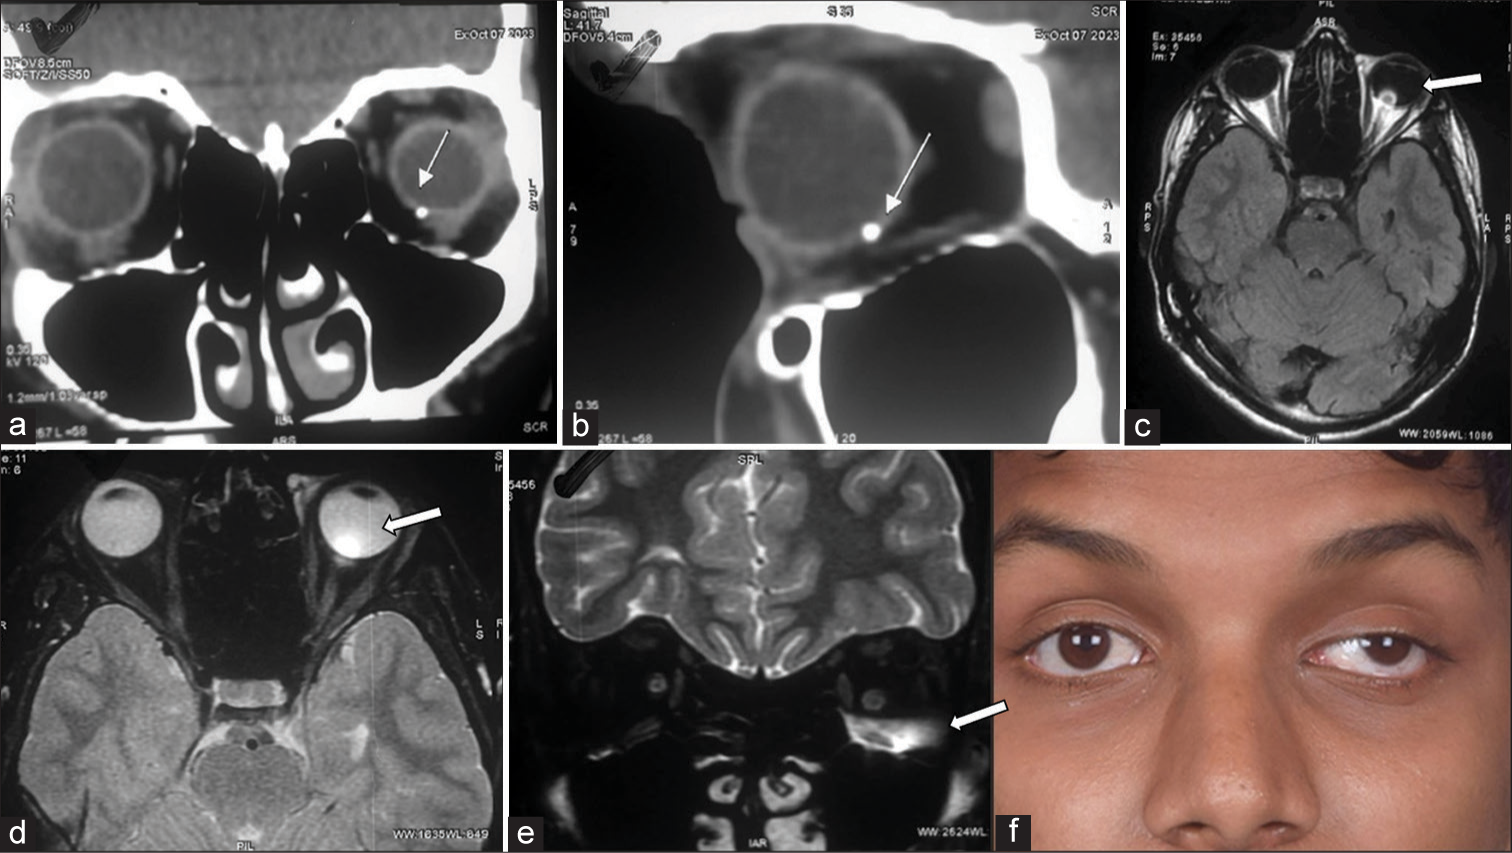 (a and b) show the round, small, hyperintense foreign body of 1mm in the inferior sclera in the coronal and sagittal section of the CT orbit, respectively (arrows). (c and d) show hyperintense foreign bodies in the axial section of the MRI orbit (arrows). (e) shows hyperintensity involving the inferior rectus muscle of the orbit (arrow). (f) shows the clinical appearance of the patient concerned (arrow).